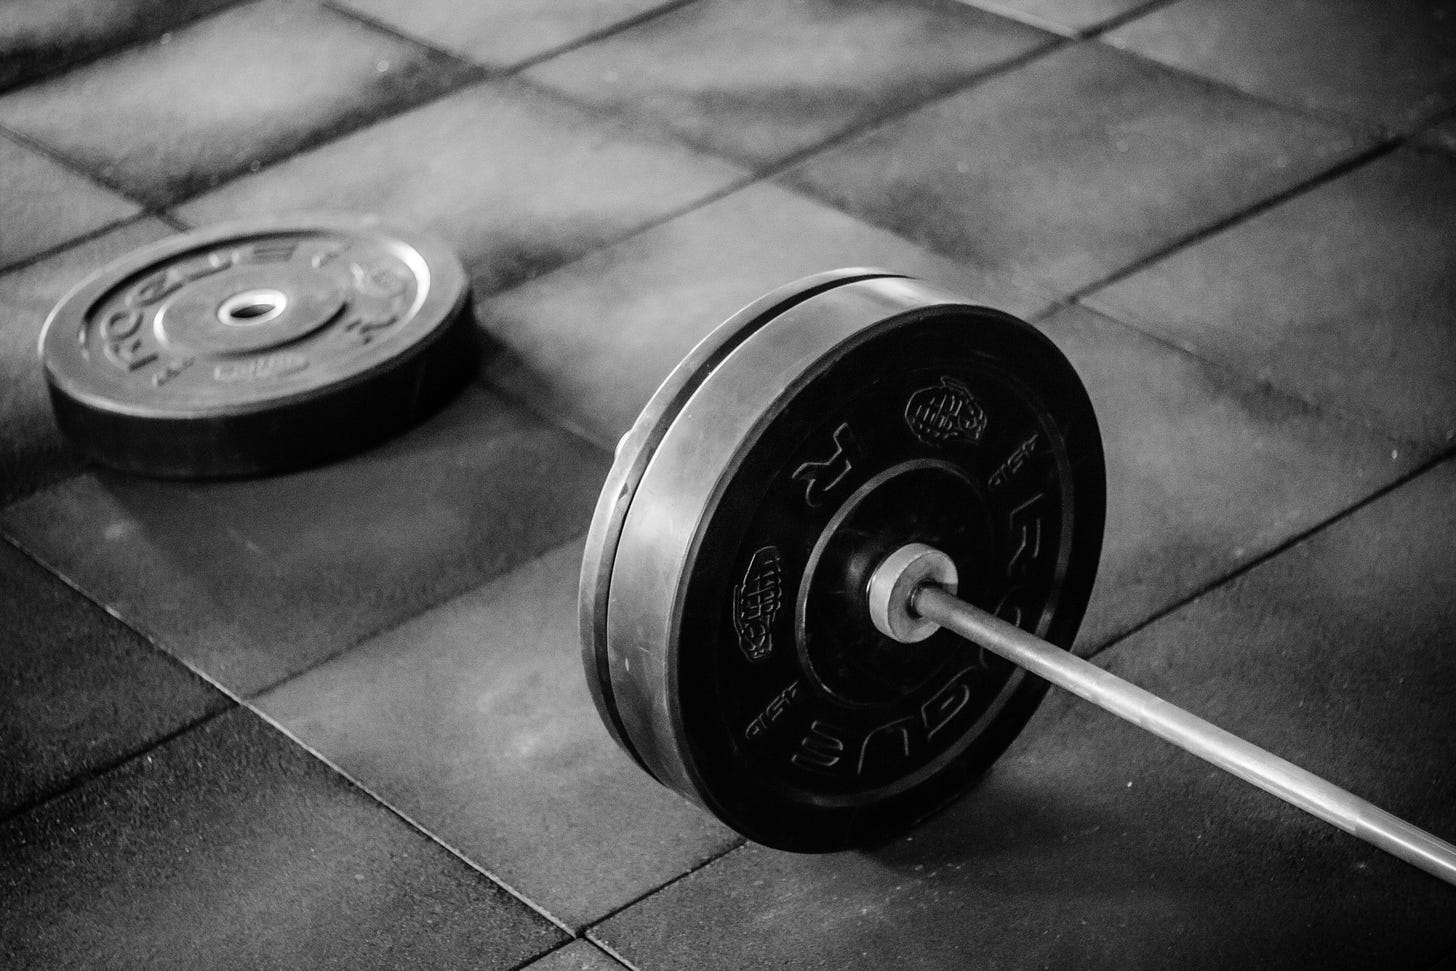 Gym weights lying on the floor